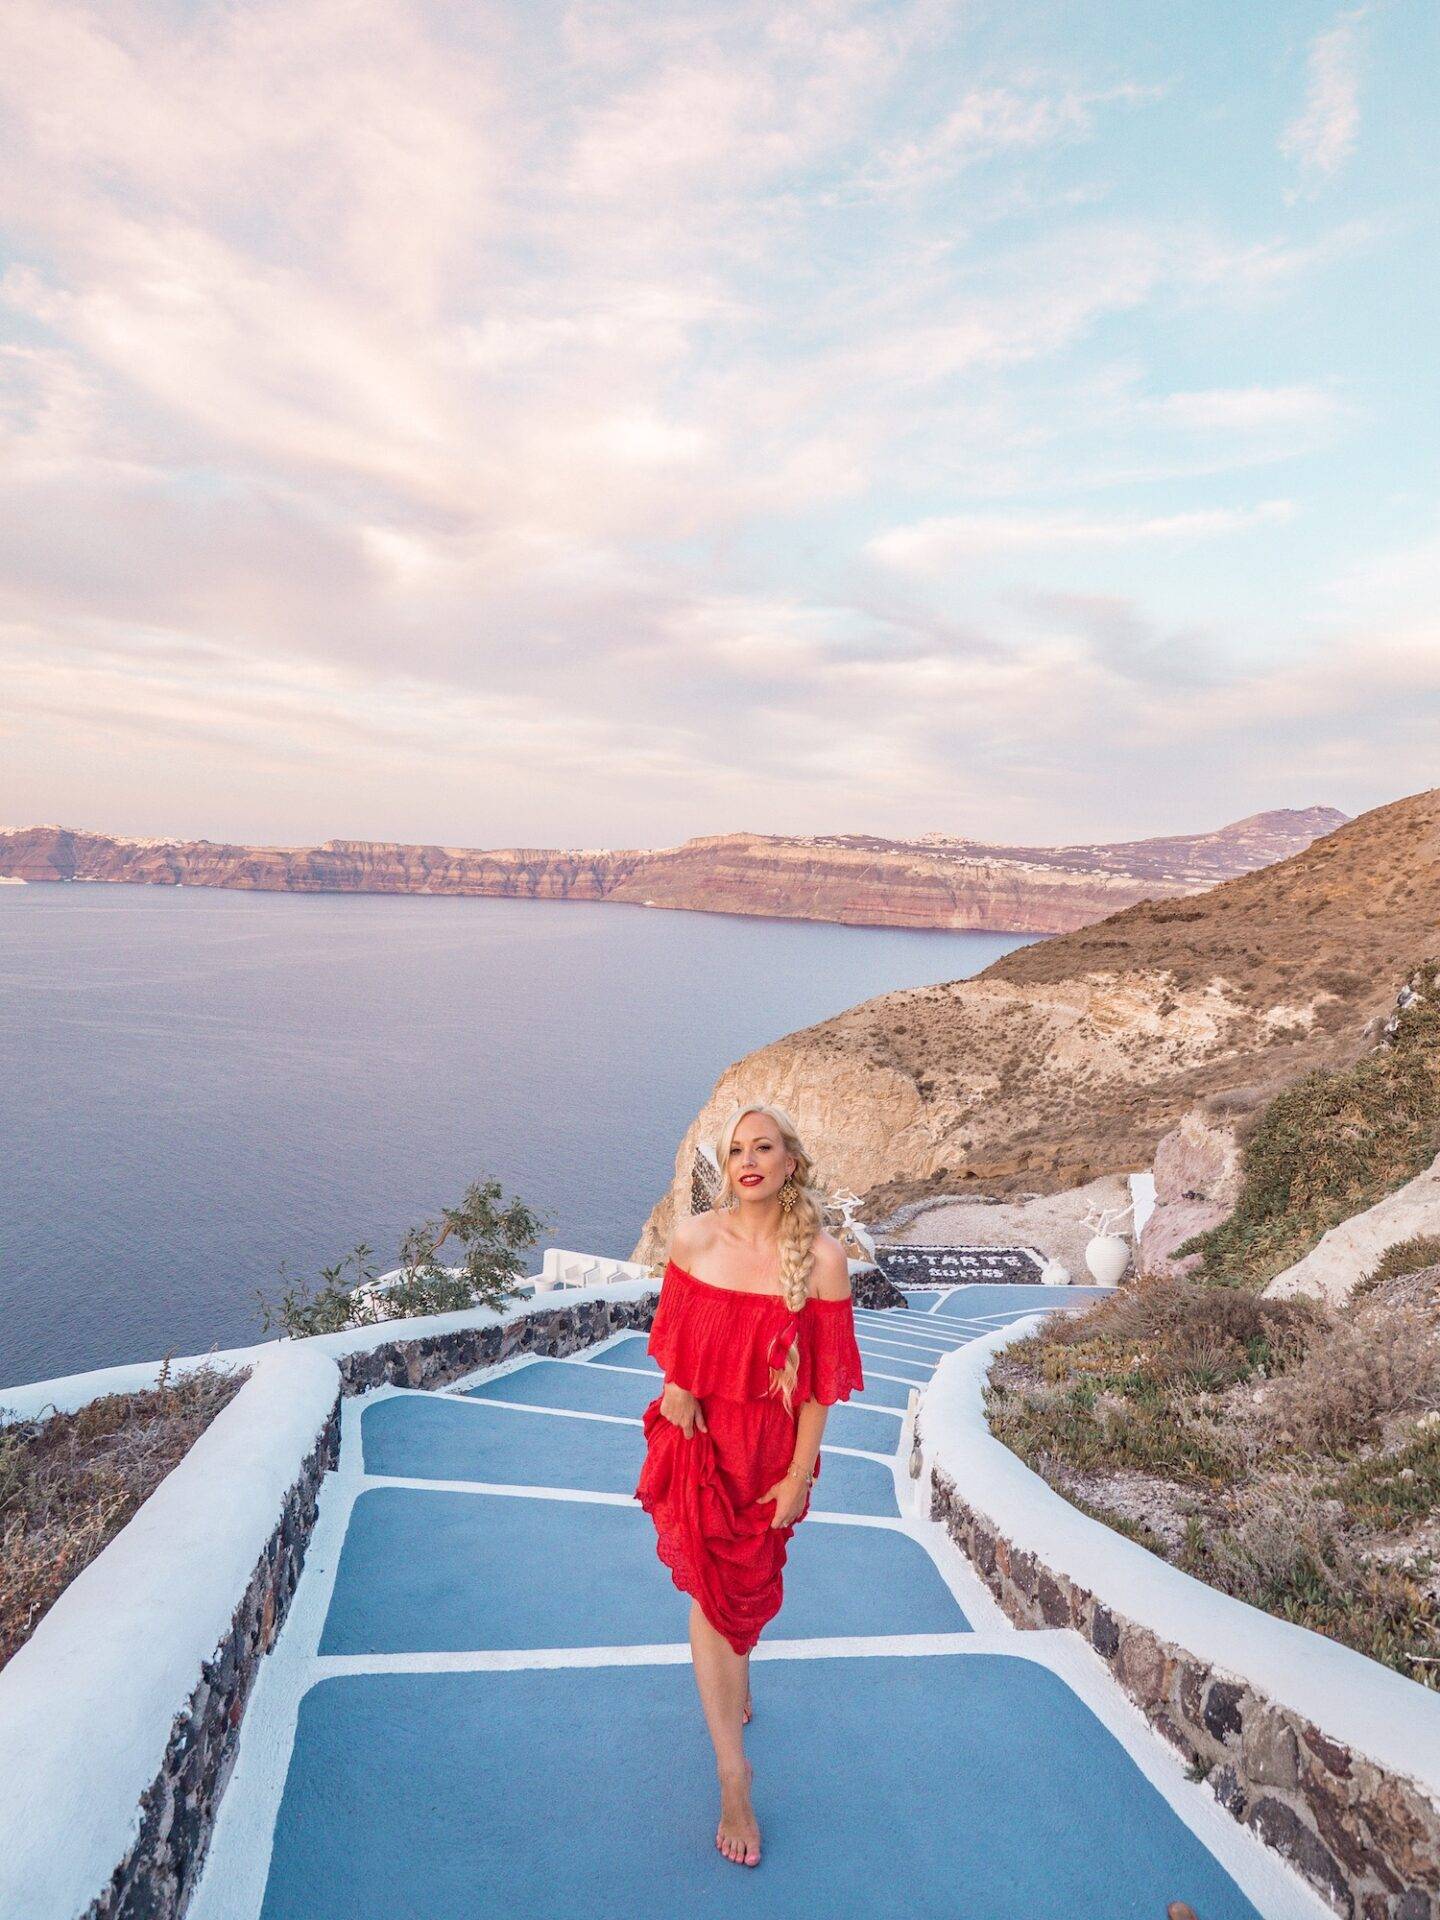 The best photo spots and most instagrammable places in Santorini: Astarte Suites in Akrotiri. Click the photo to see the rest of my list of the best instagram photo spots in Santorini!